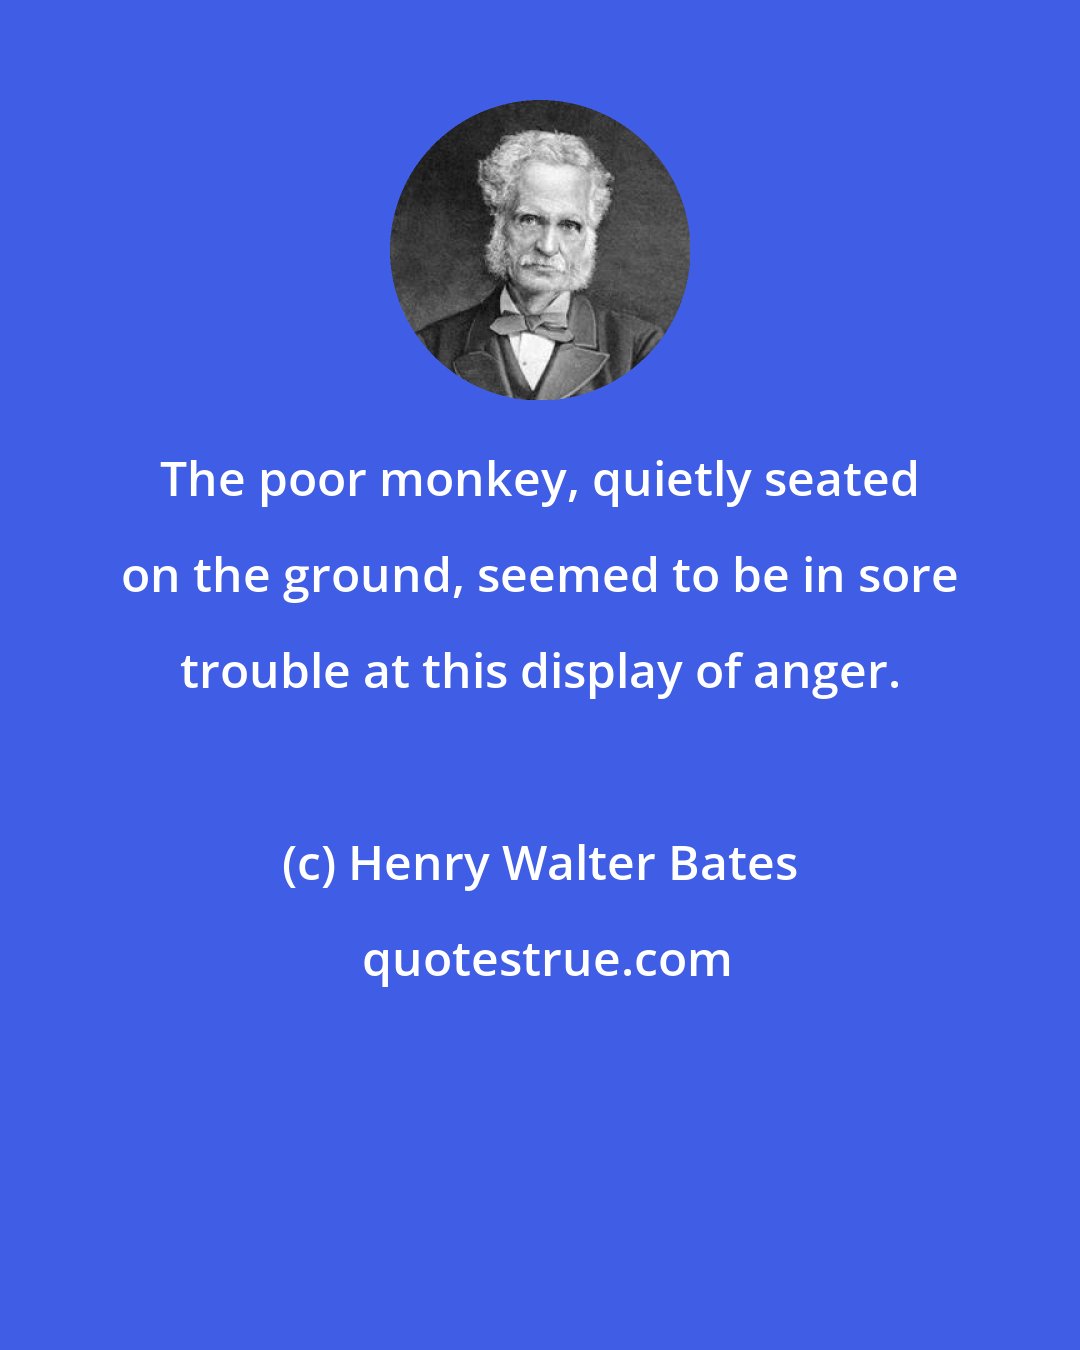 Henry Walter Bates: The poor monkey, quietly seated on the ground, seemed to be in sore trouble at this display of anger.